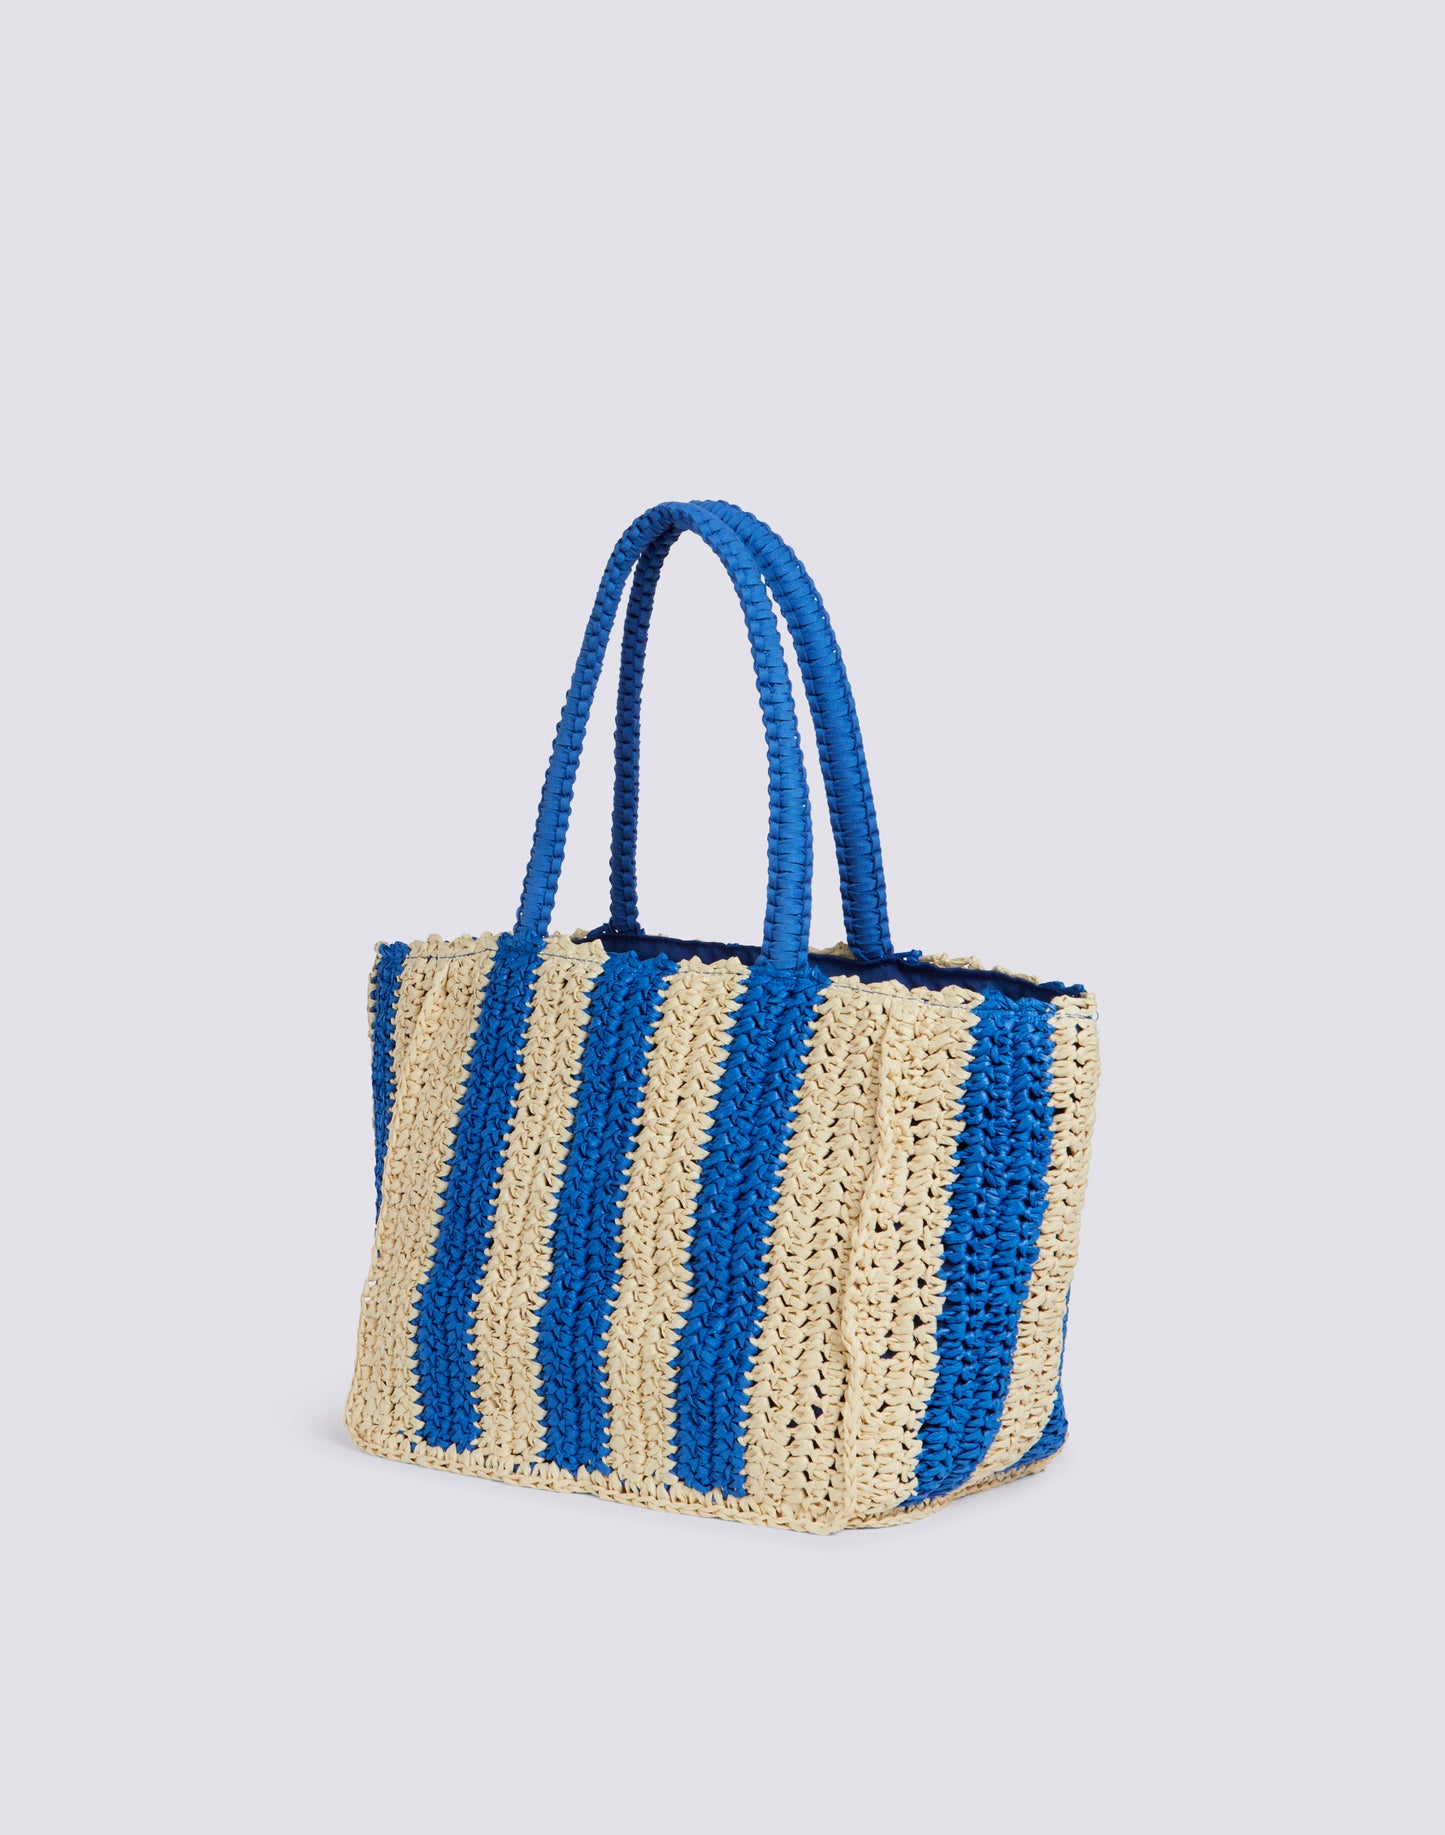 VITA - WOVEN STRAW BAG WITH EMBROIDERED LOGO